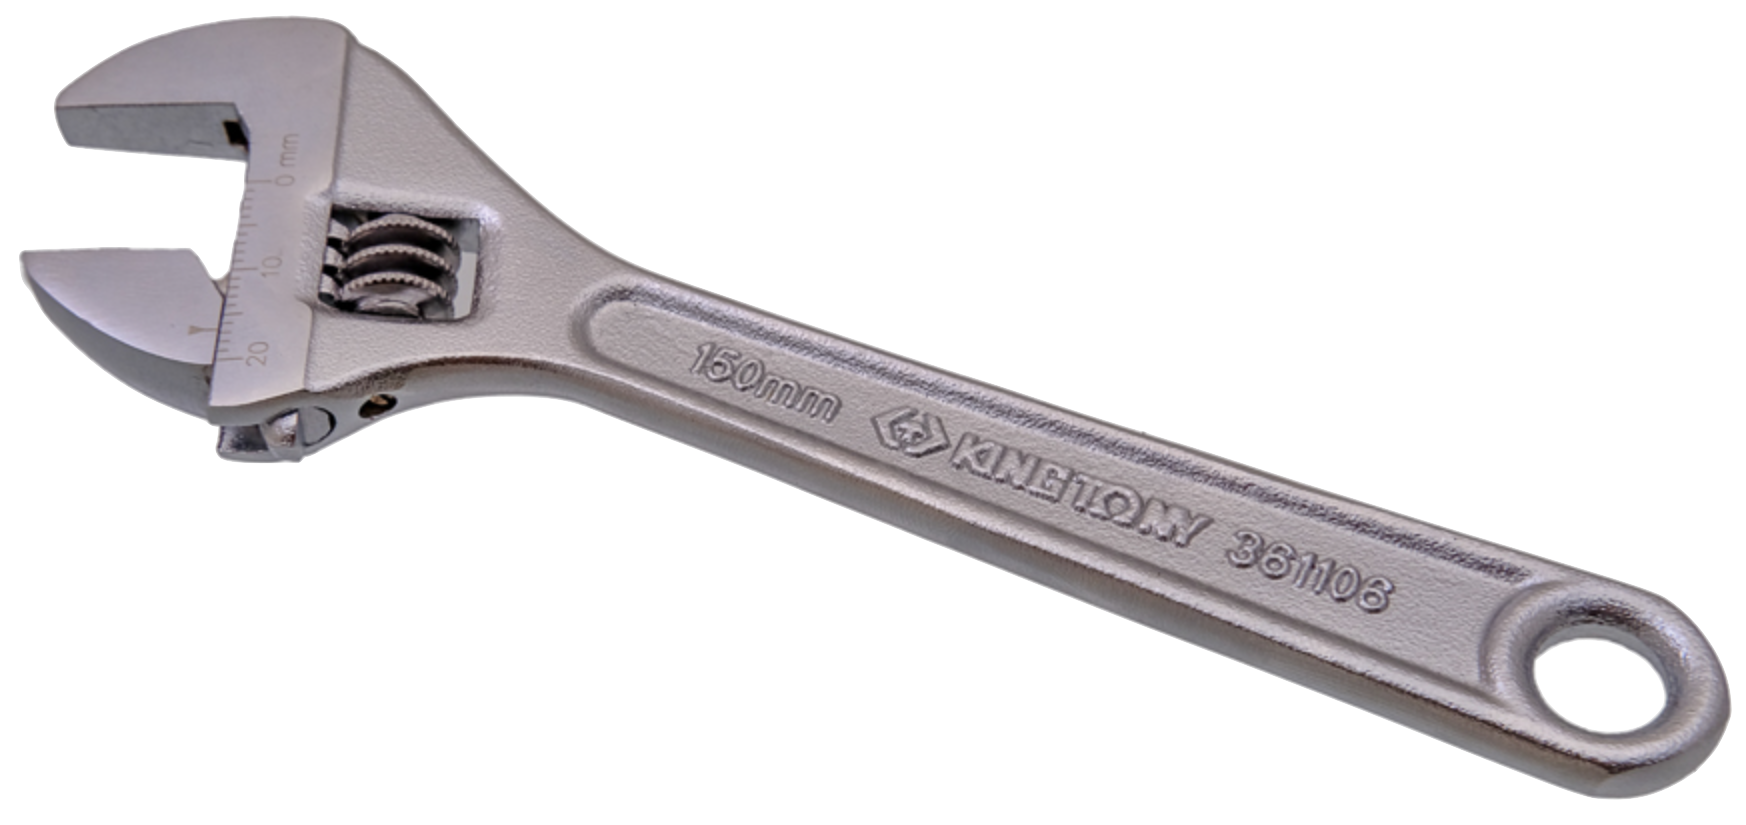 Adjustable_wrench_kt_pro_tools.png